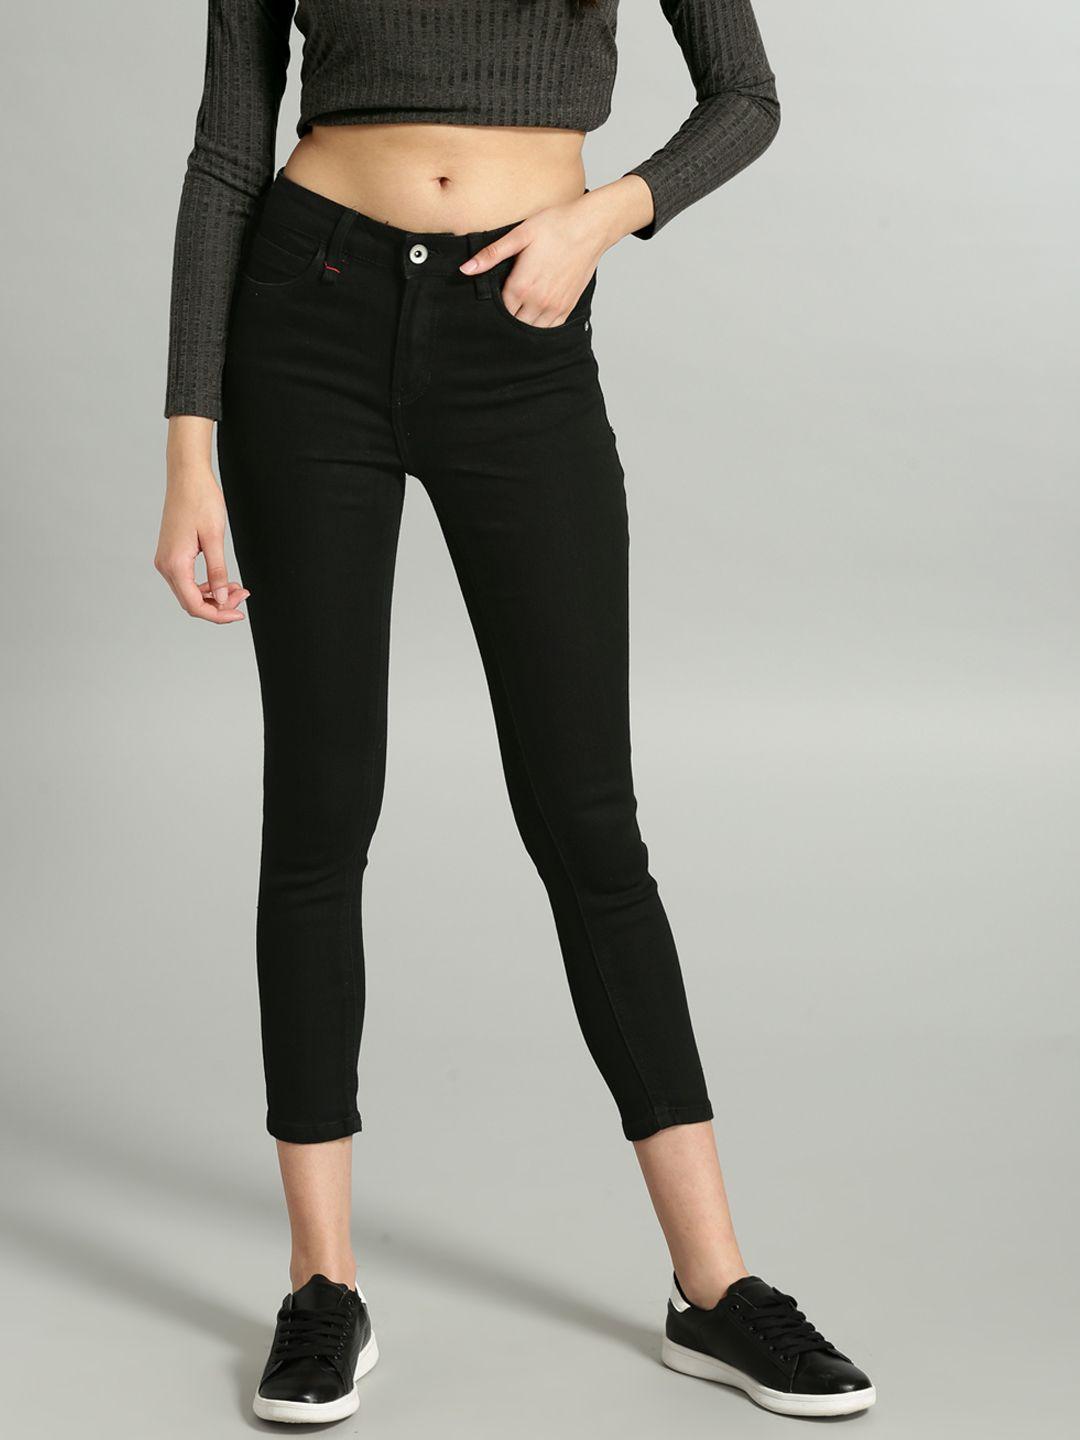 roadster-women-black-skinny-fit-mid-rise-clean-look-stretchable-cropped-jeans